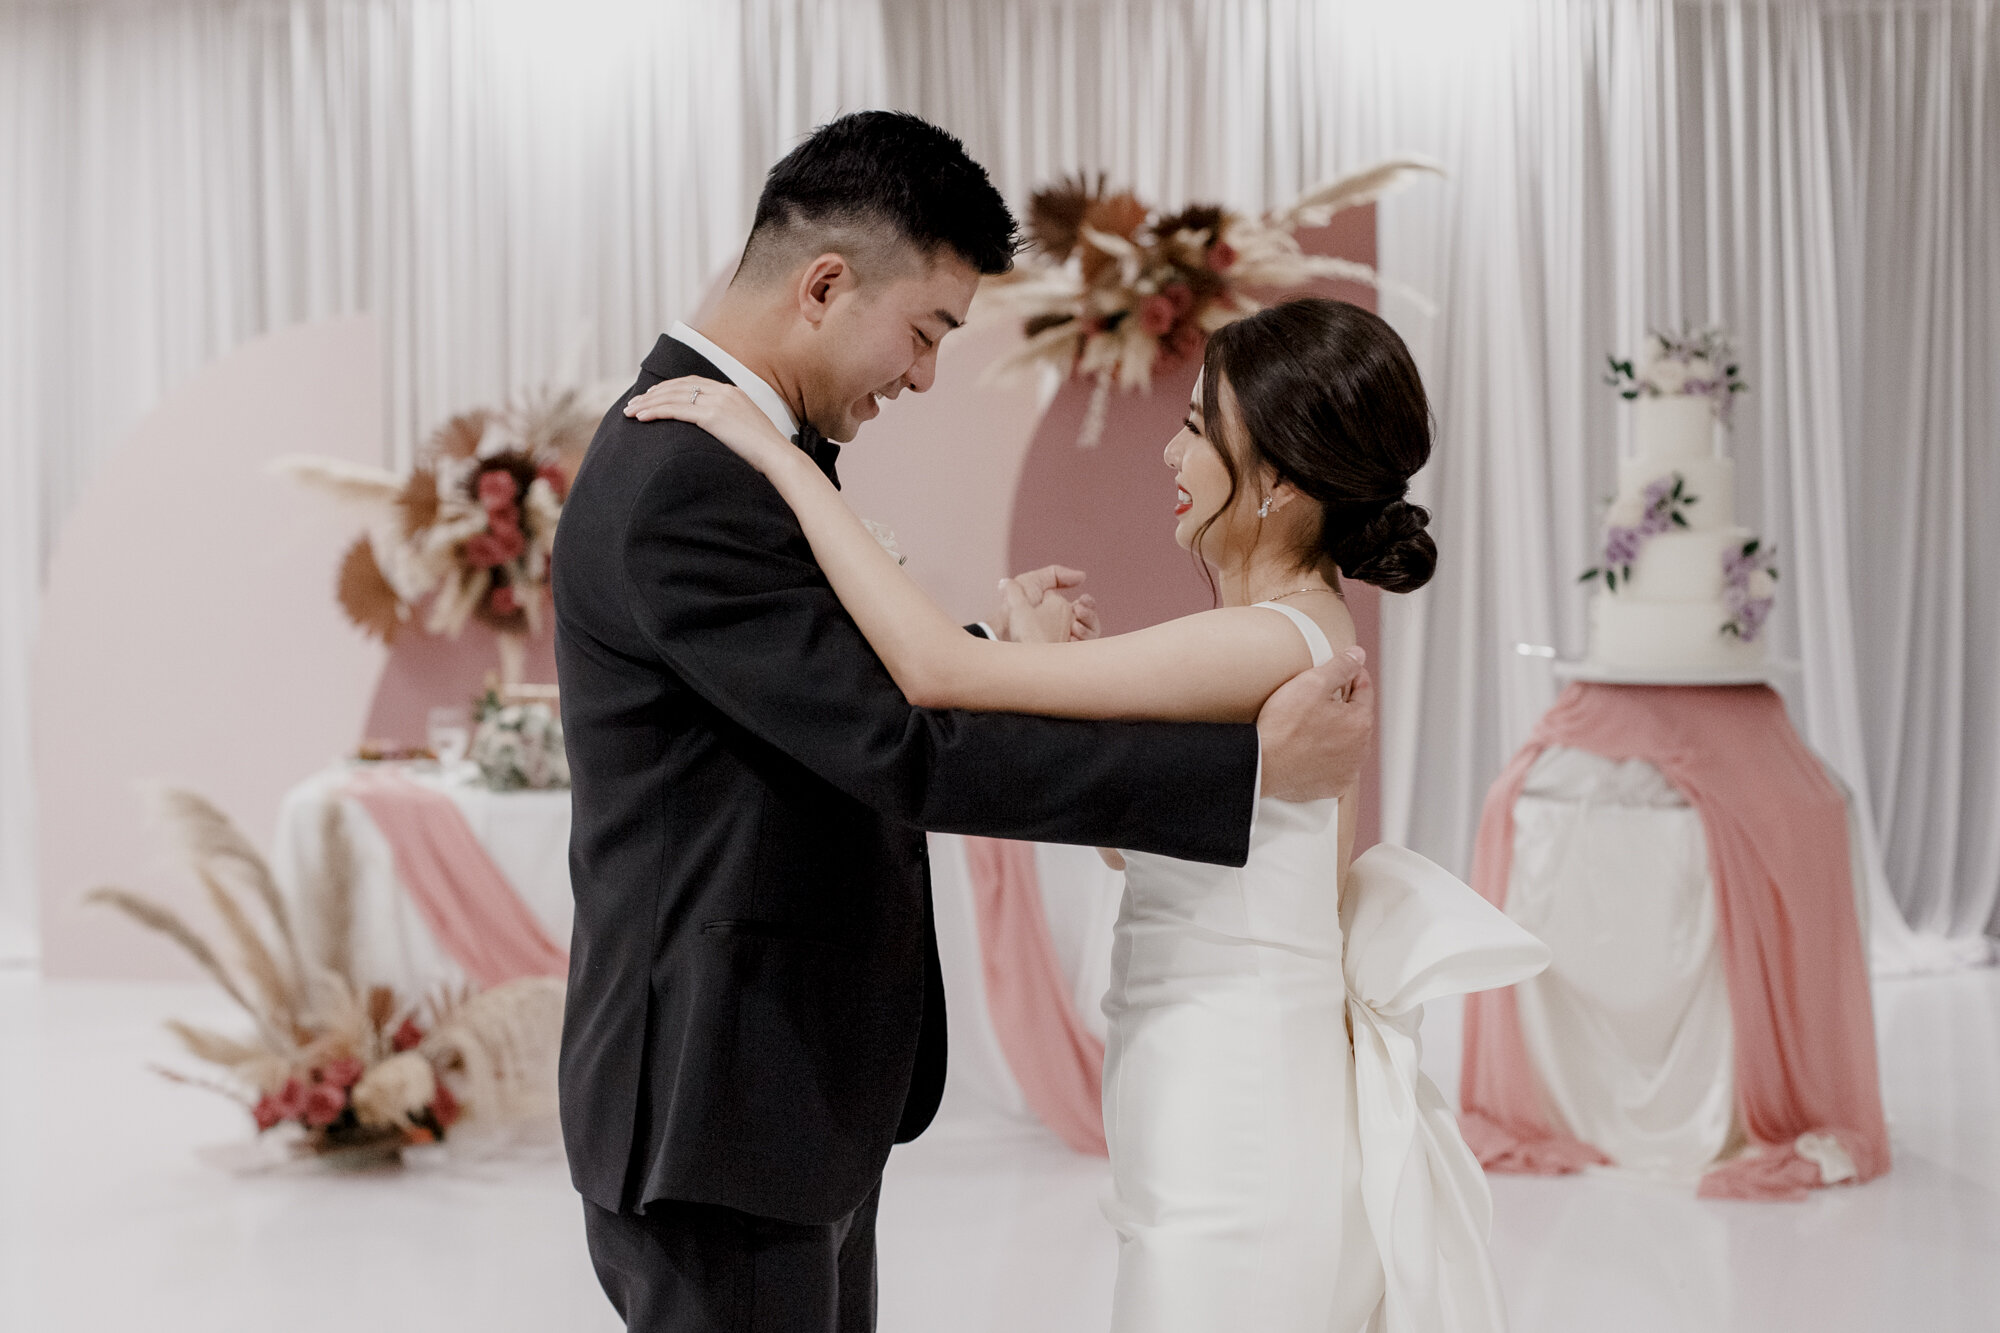 Bride and groom first dance. Urban Elegant East Asian Wedding at Chateau De L’Amour